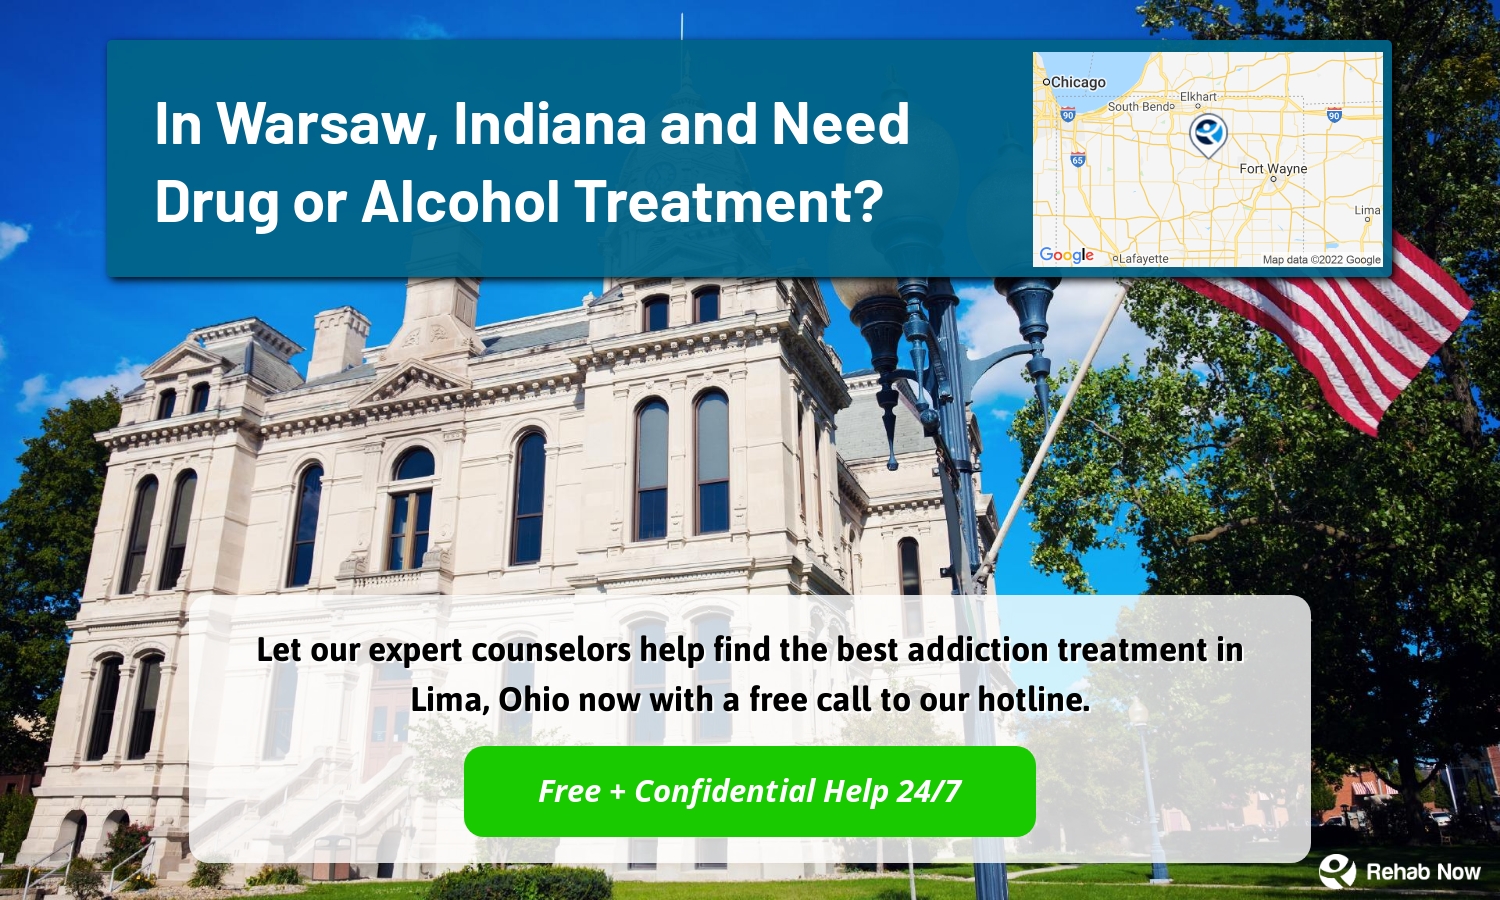 Let our expert counselors help find the best addiction treatment in Lima, Ohio now with a free call to our hotline.